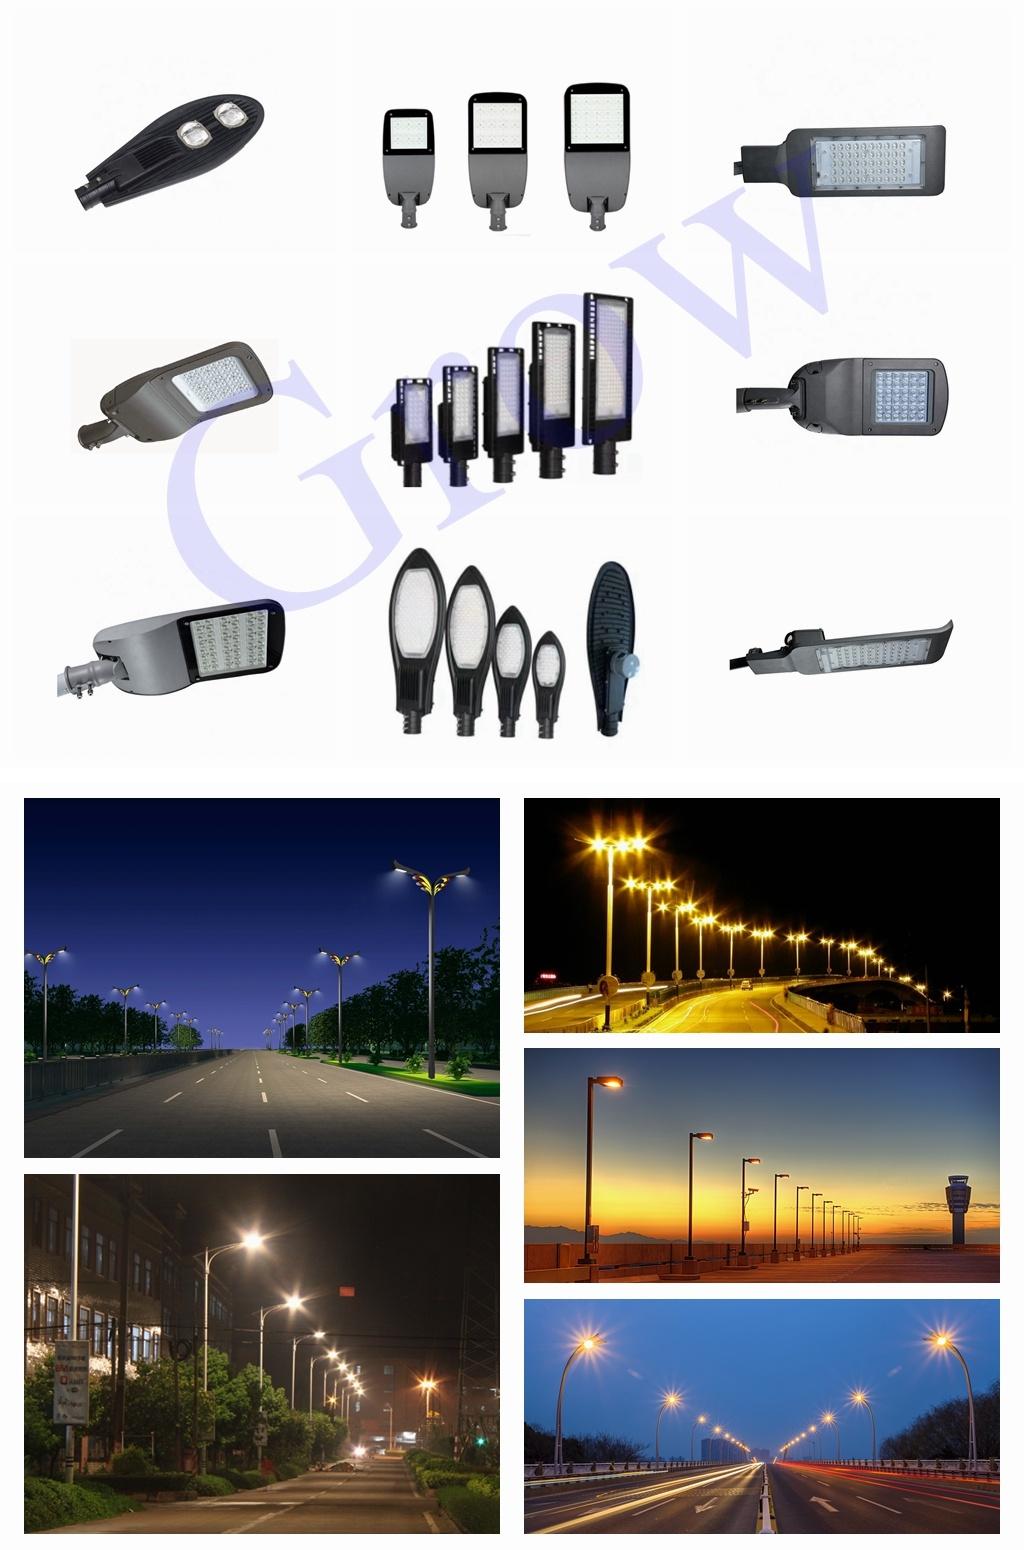 China Factory Price 30W/60W/90W/120W LED Solar Street Lights Outdoor IP65 Waterproof Dusk to Dawn Area Lighting Security Lights